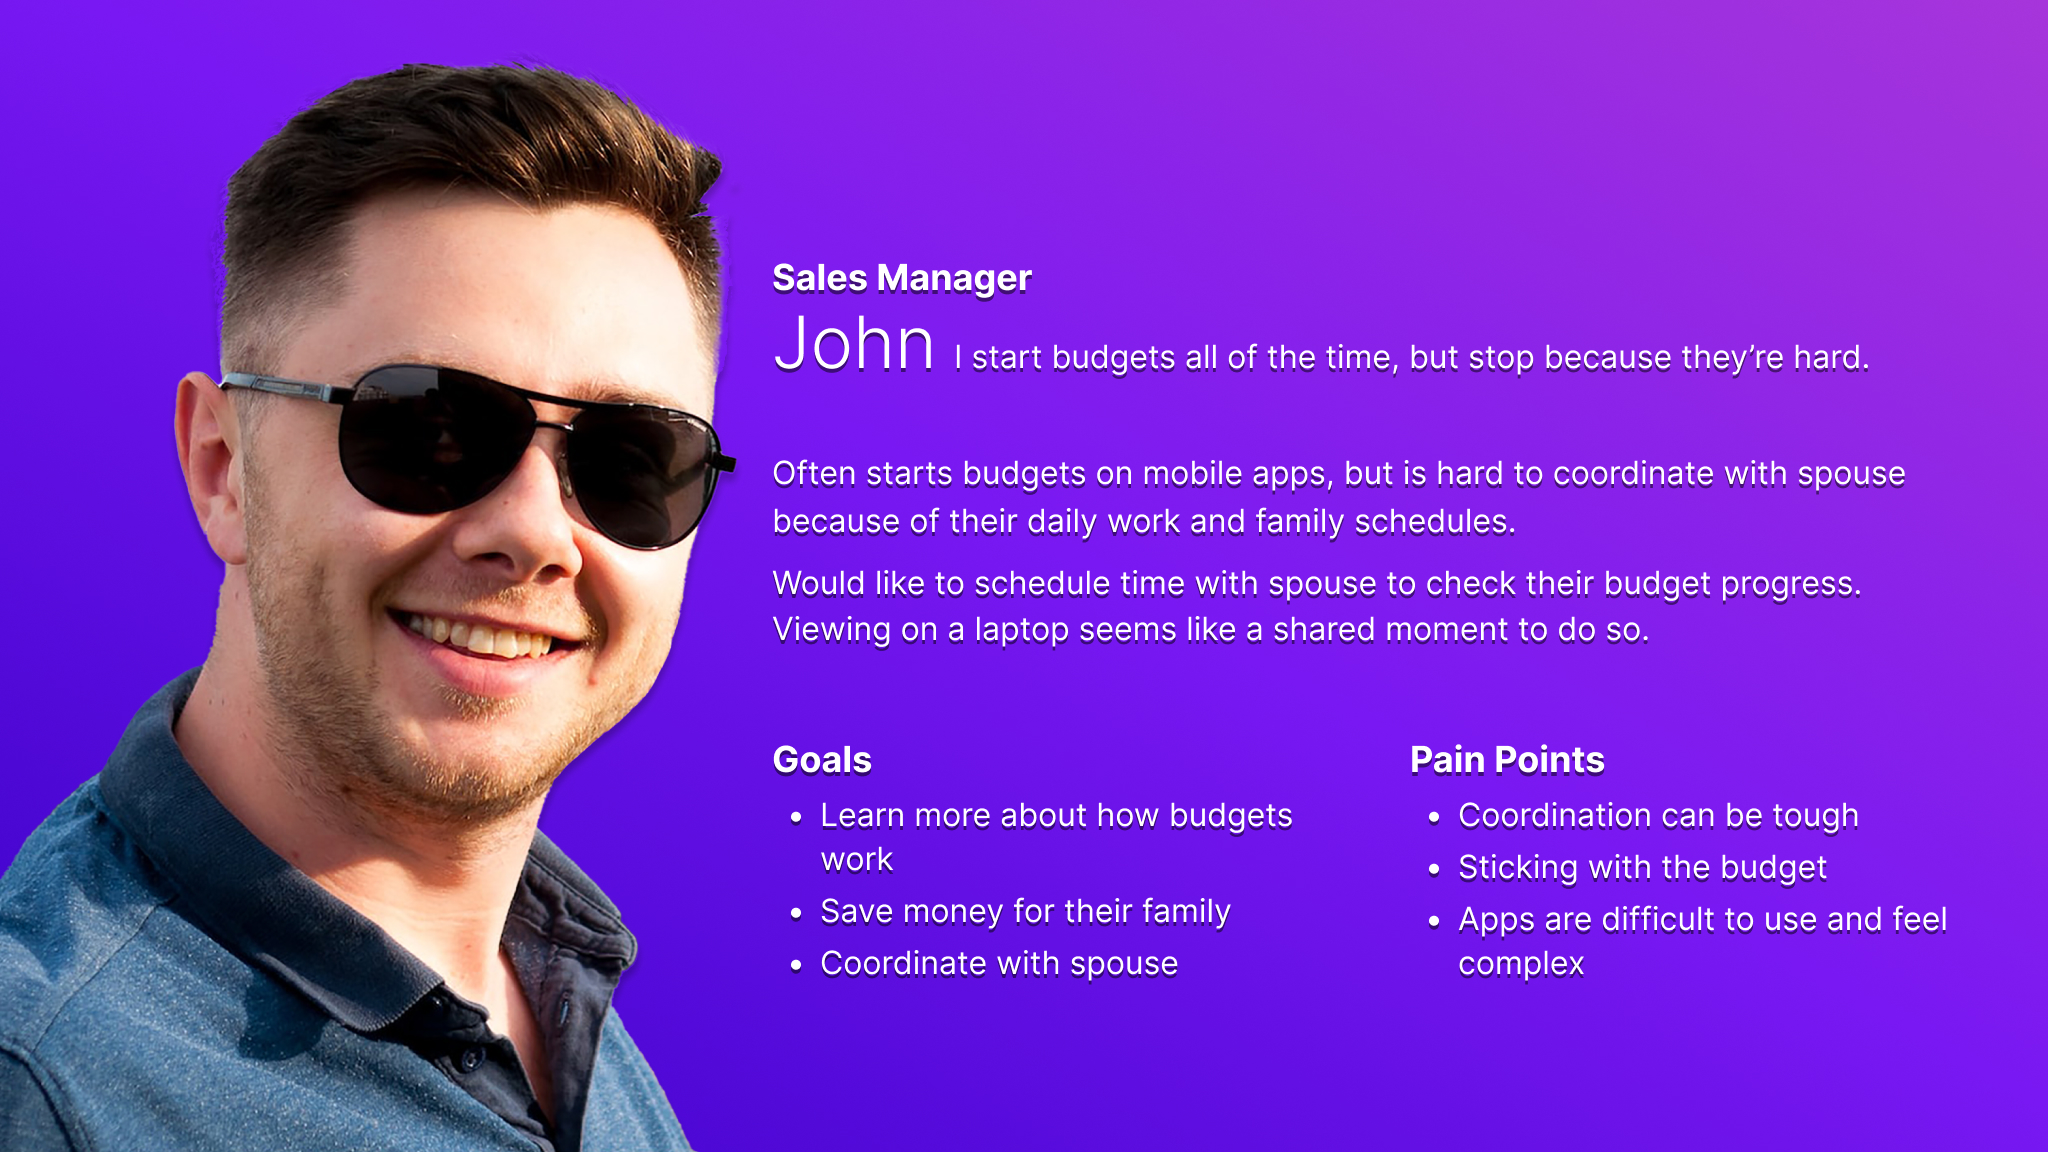 Persona card for John who represents users who often start but quit using budget apps.